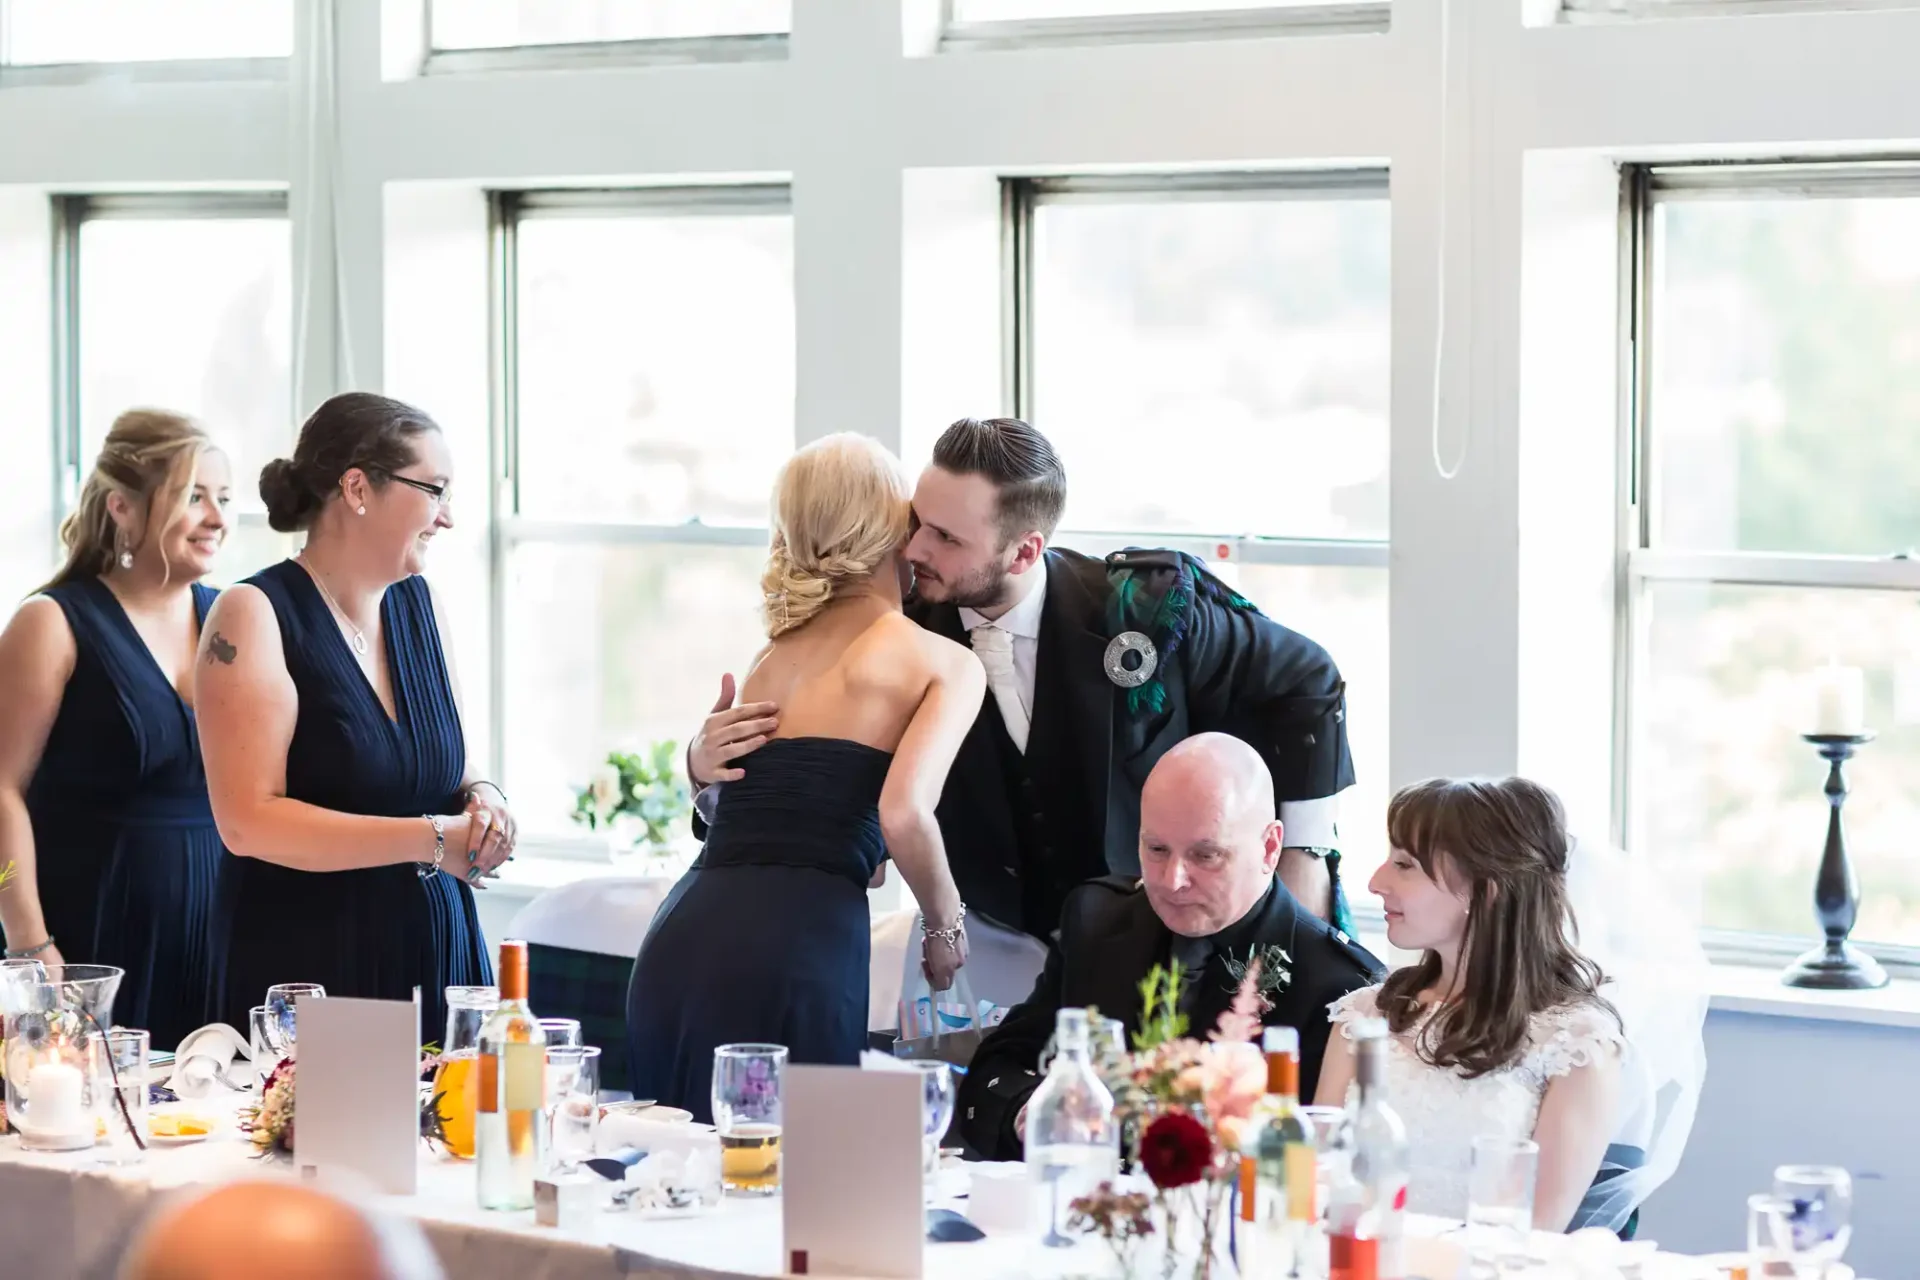 A man in a suit kisses a woman in a blue dress at a wedding reception, surrounded by seated guests and floral decorations.